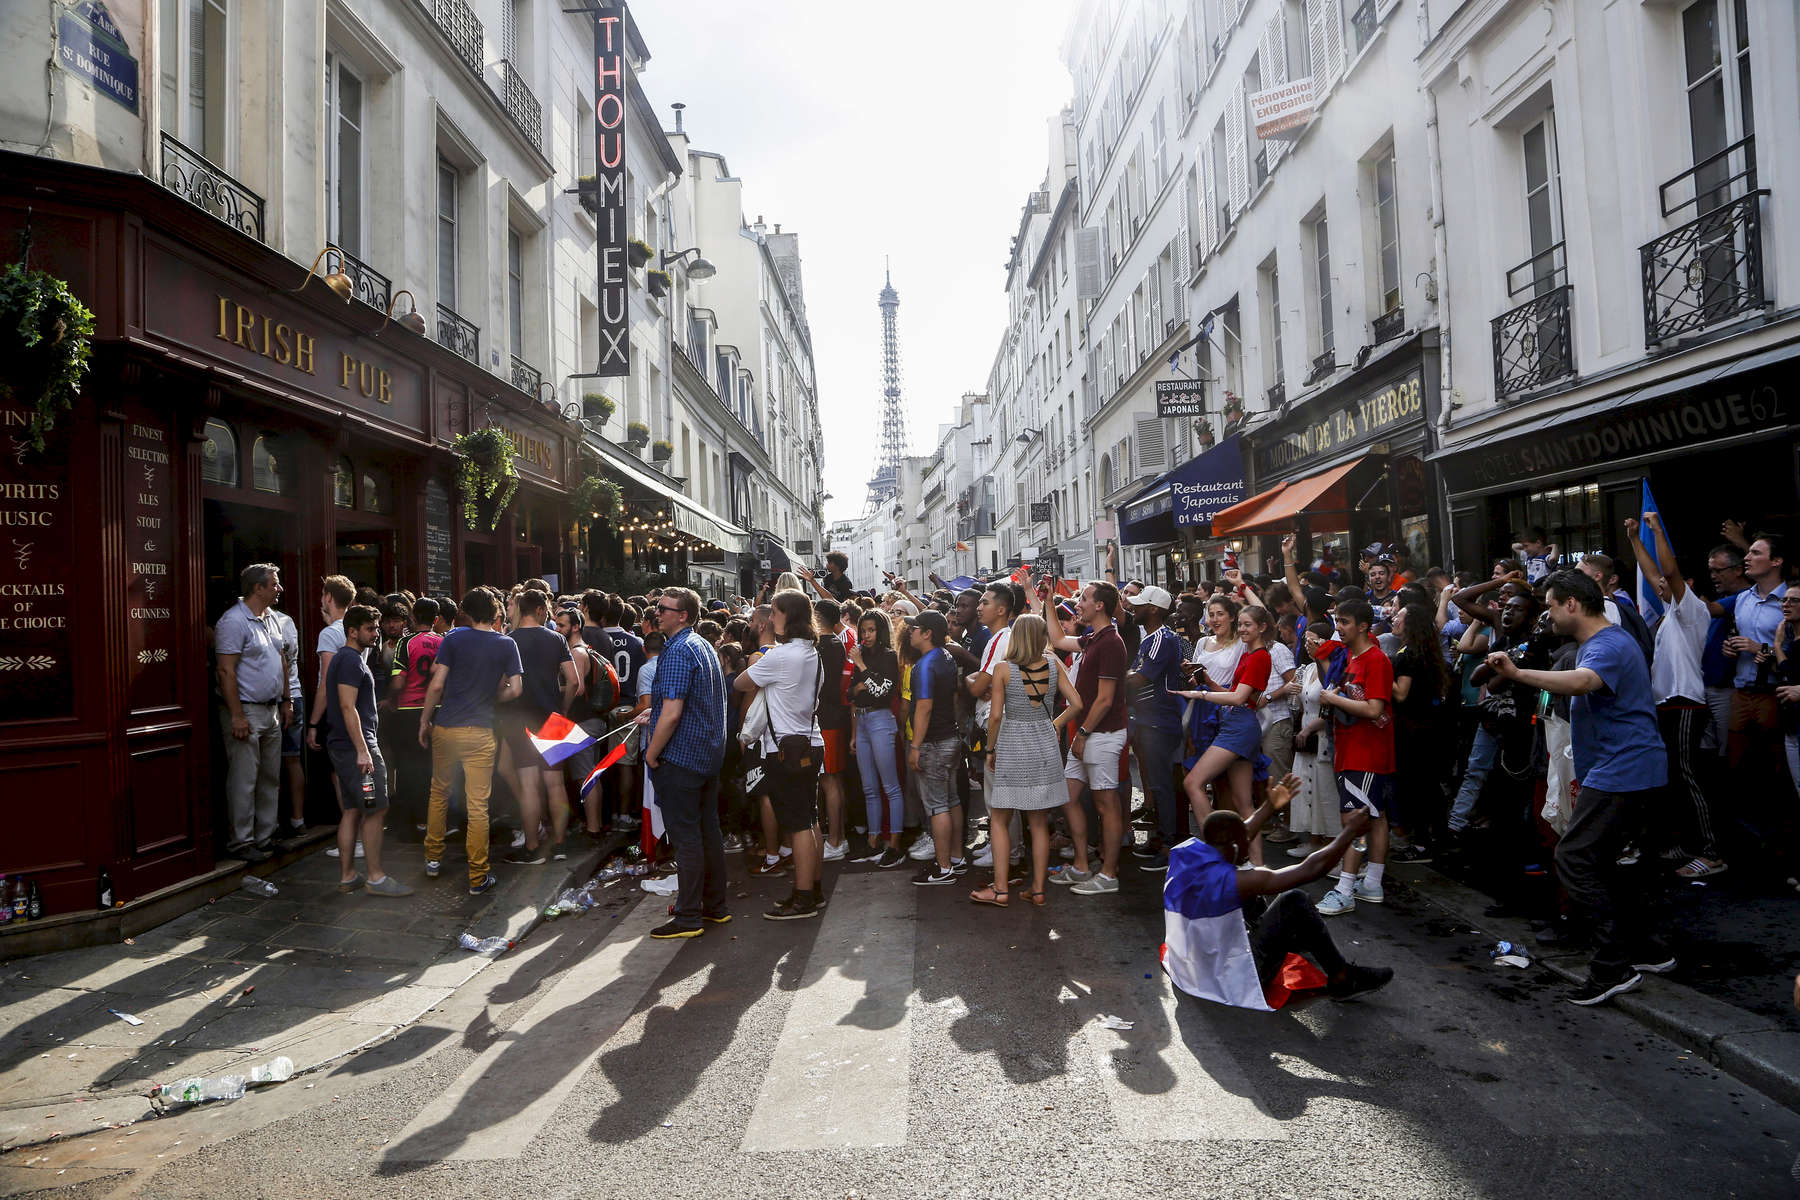 Supporters watch the World Cup Soccer final on the TV of a bar, on July 15, 2018, in Paris France.On the historical Soccer World Cup final between France and Croatia, fans were invited to watch the game on giant screens set up in the Champs de Mars, in front of the Eiffel Tower in Paris. But this Fan Zone was full long before the start of the game, leaving thousand of supporters scrambling to find a place to watch the game close by. The nearby and usually quiet coffees and restaurants were quickly over flooded. But for the next two and a half hours, it did not matter to watch the game from the middle of the streets. Very few cars were circulating, because almost everyone in France was watching, or trying to watch the game. 